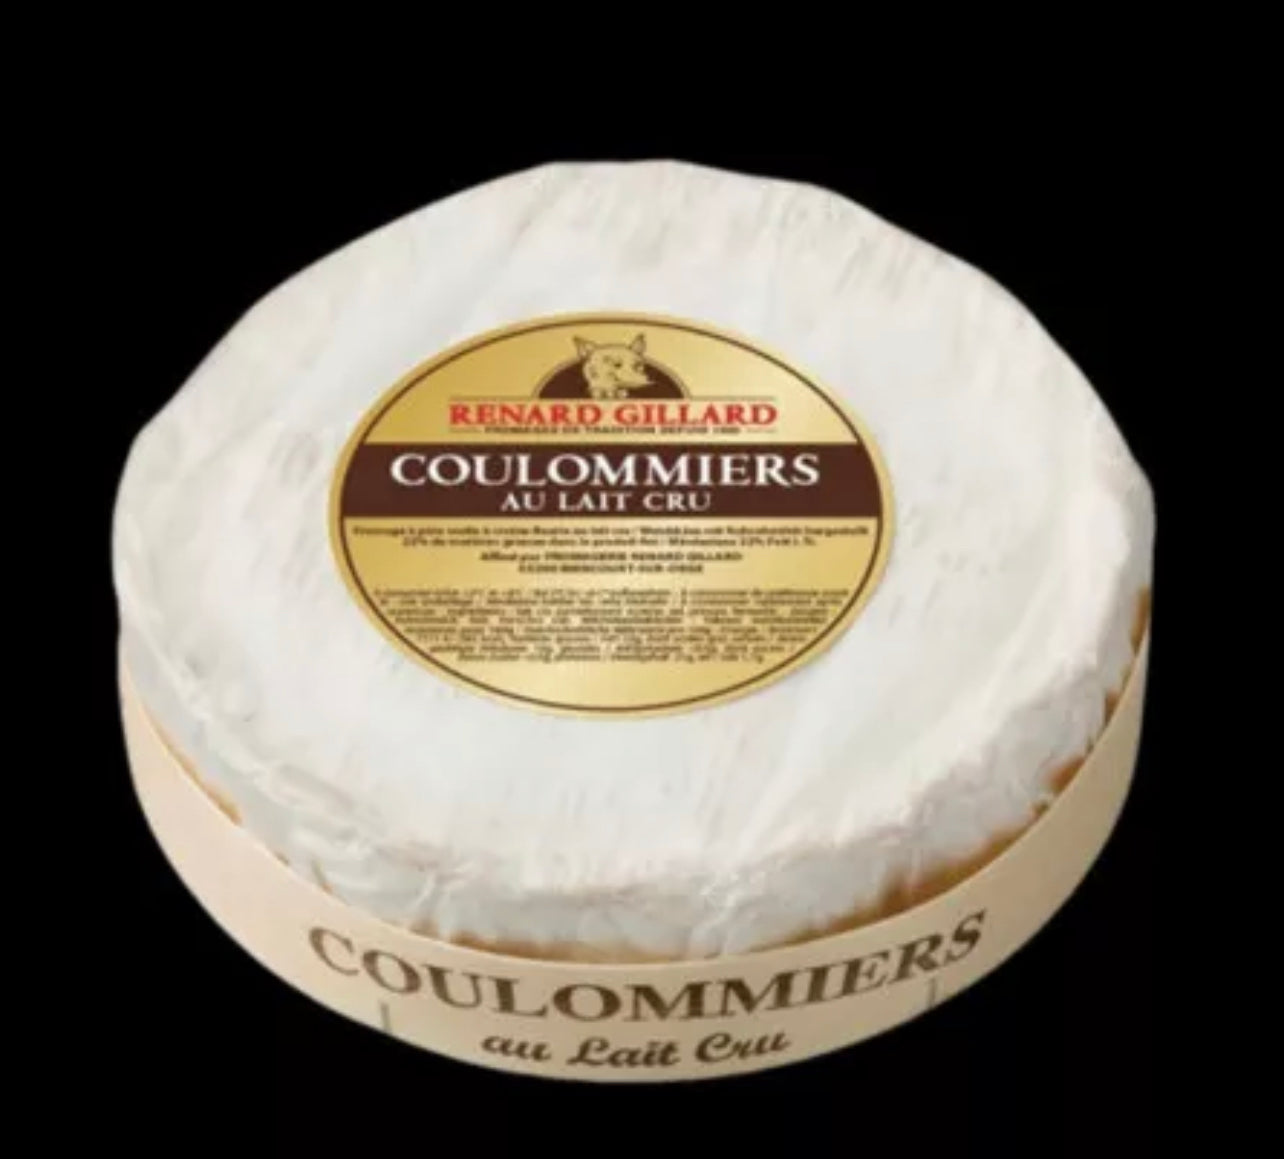 Coulommiers con leche cruda - 500g